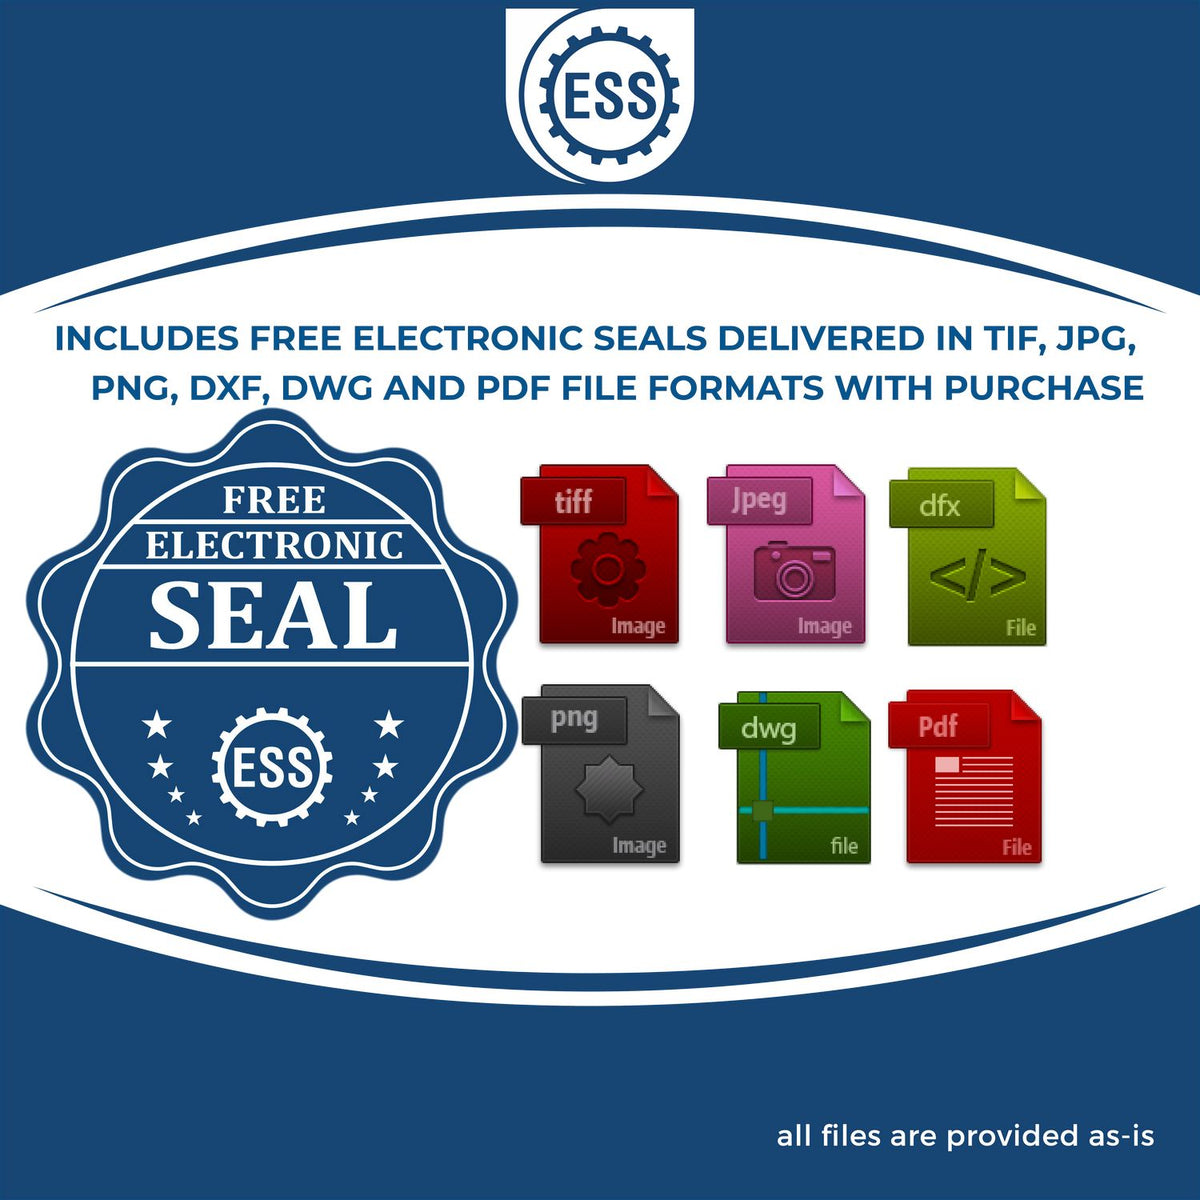 An infographic for the free electronic seal for the Florida Engineer Desk Seal illustrating the different file type icons such as DXF, DWG, TIF, JPG and PNG.